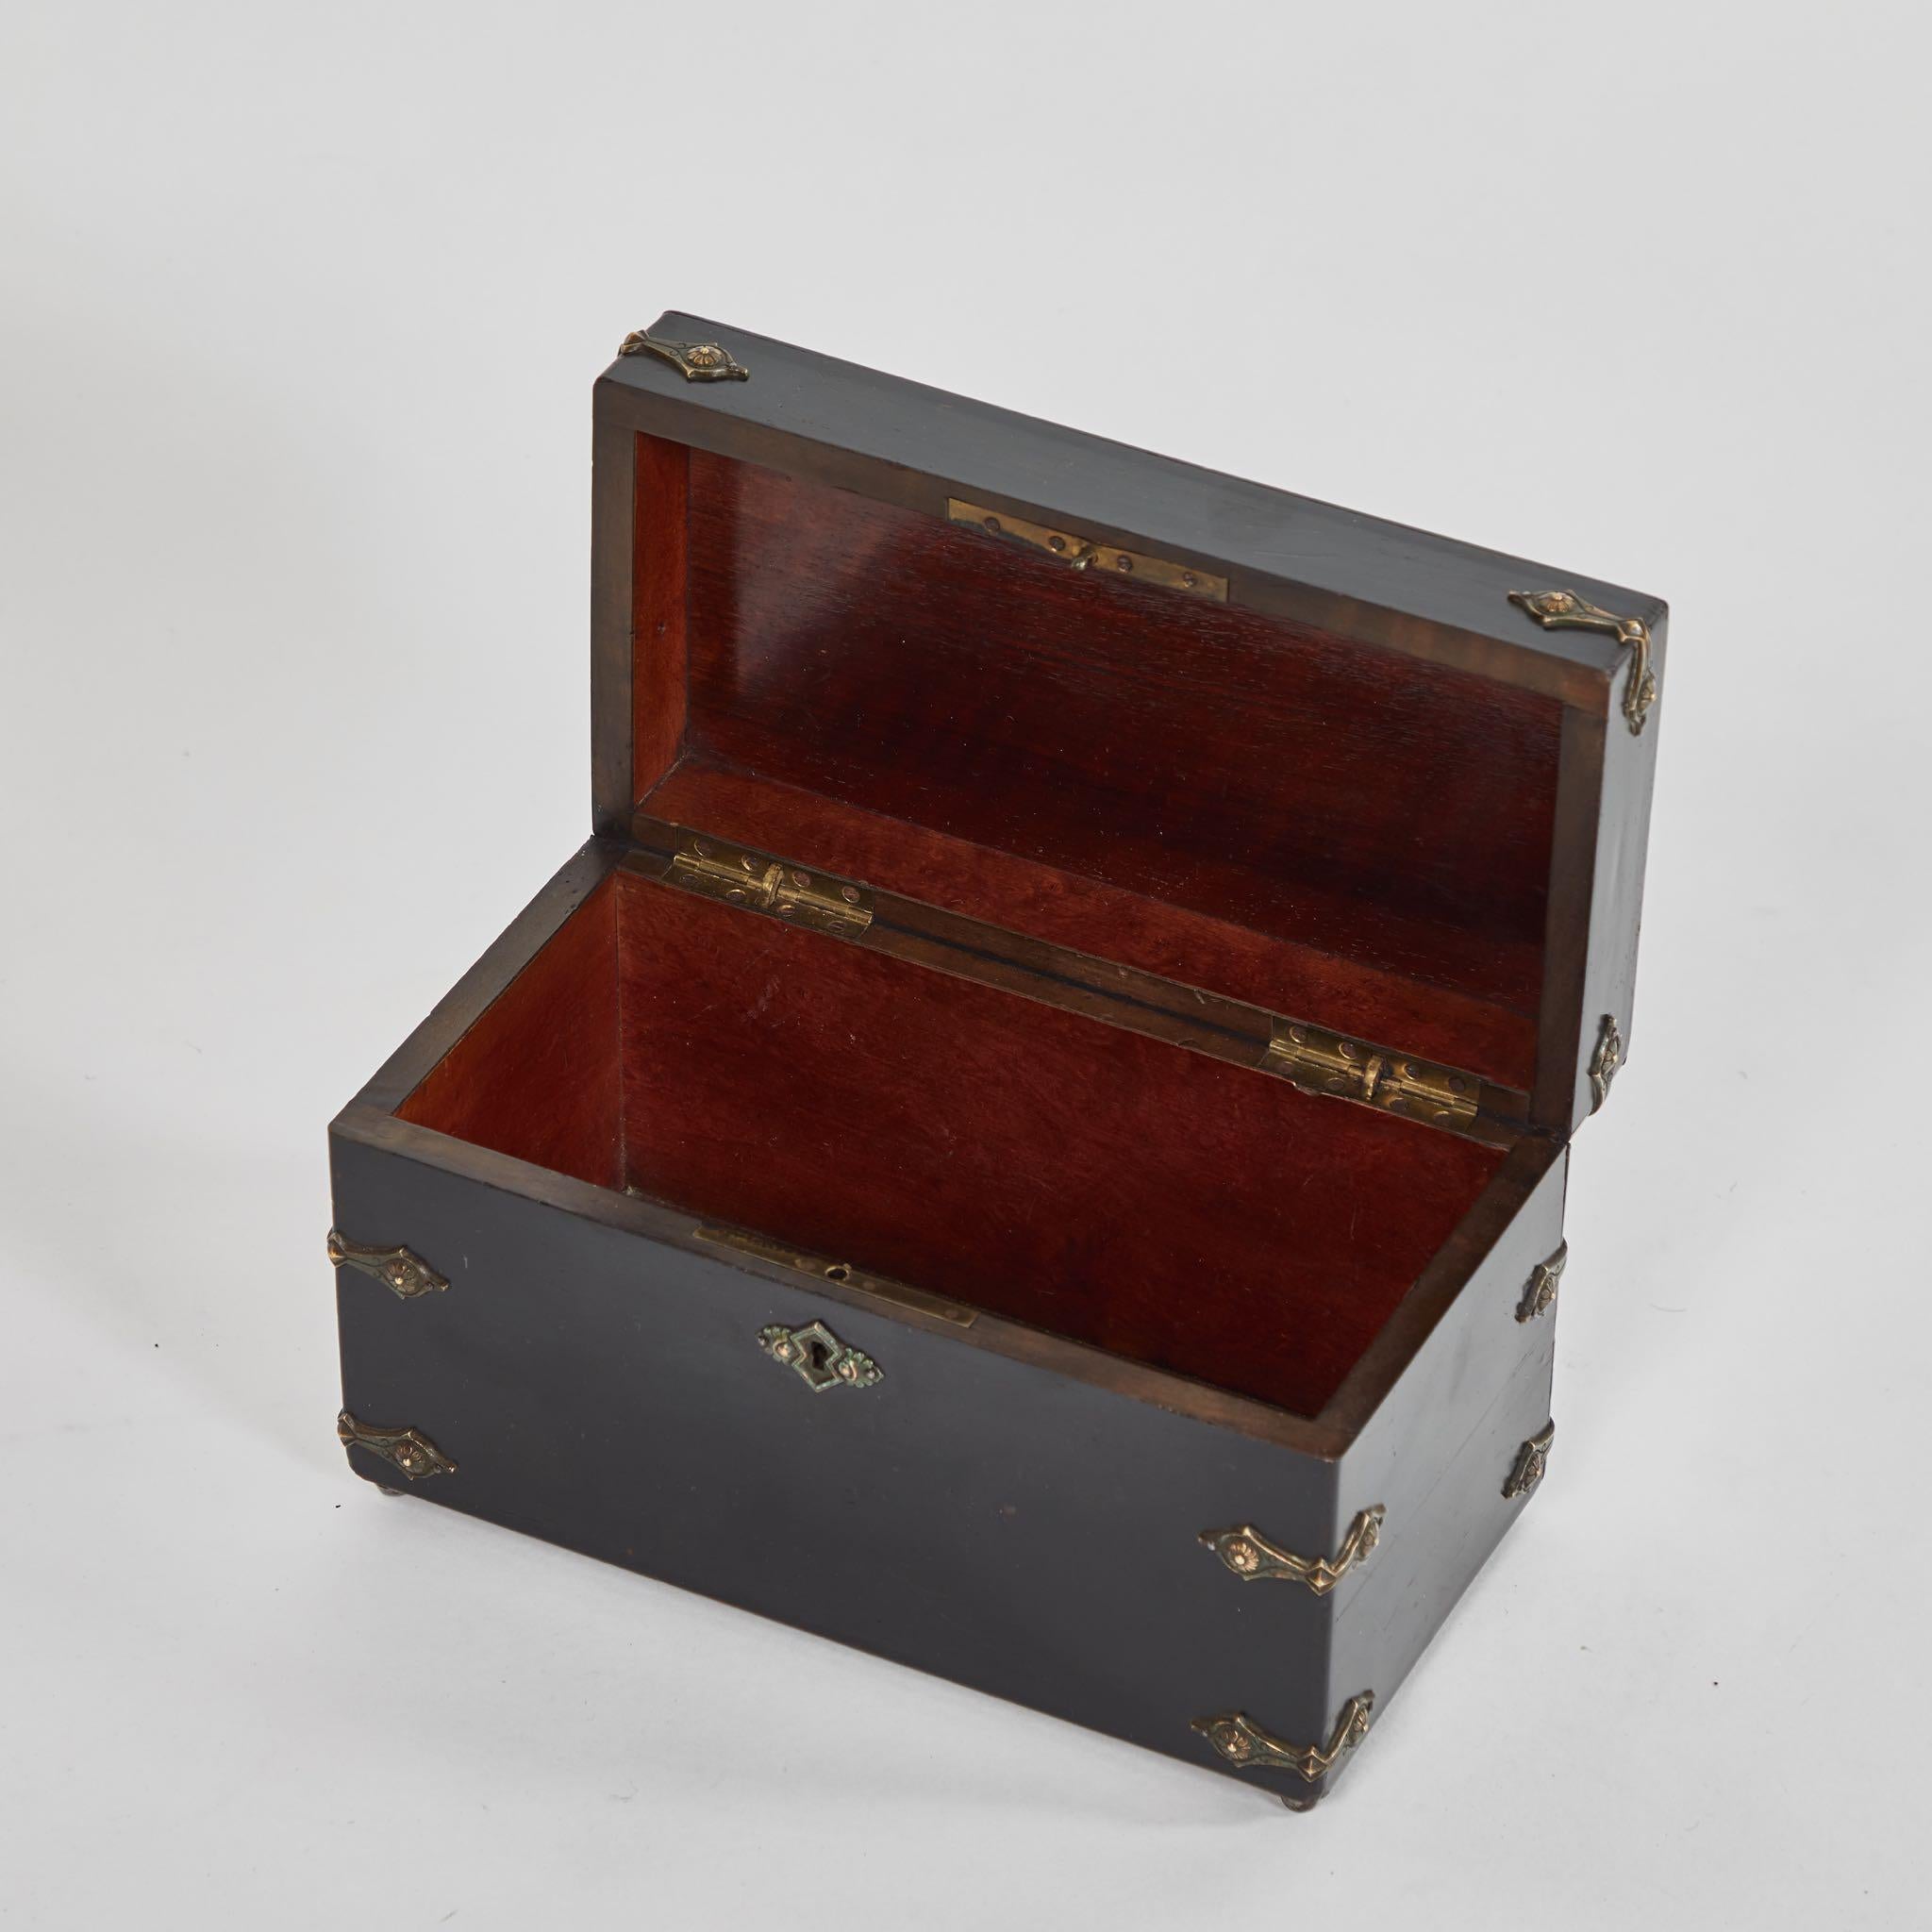 An ebonized and decorated box, originating in France, circa 1830.